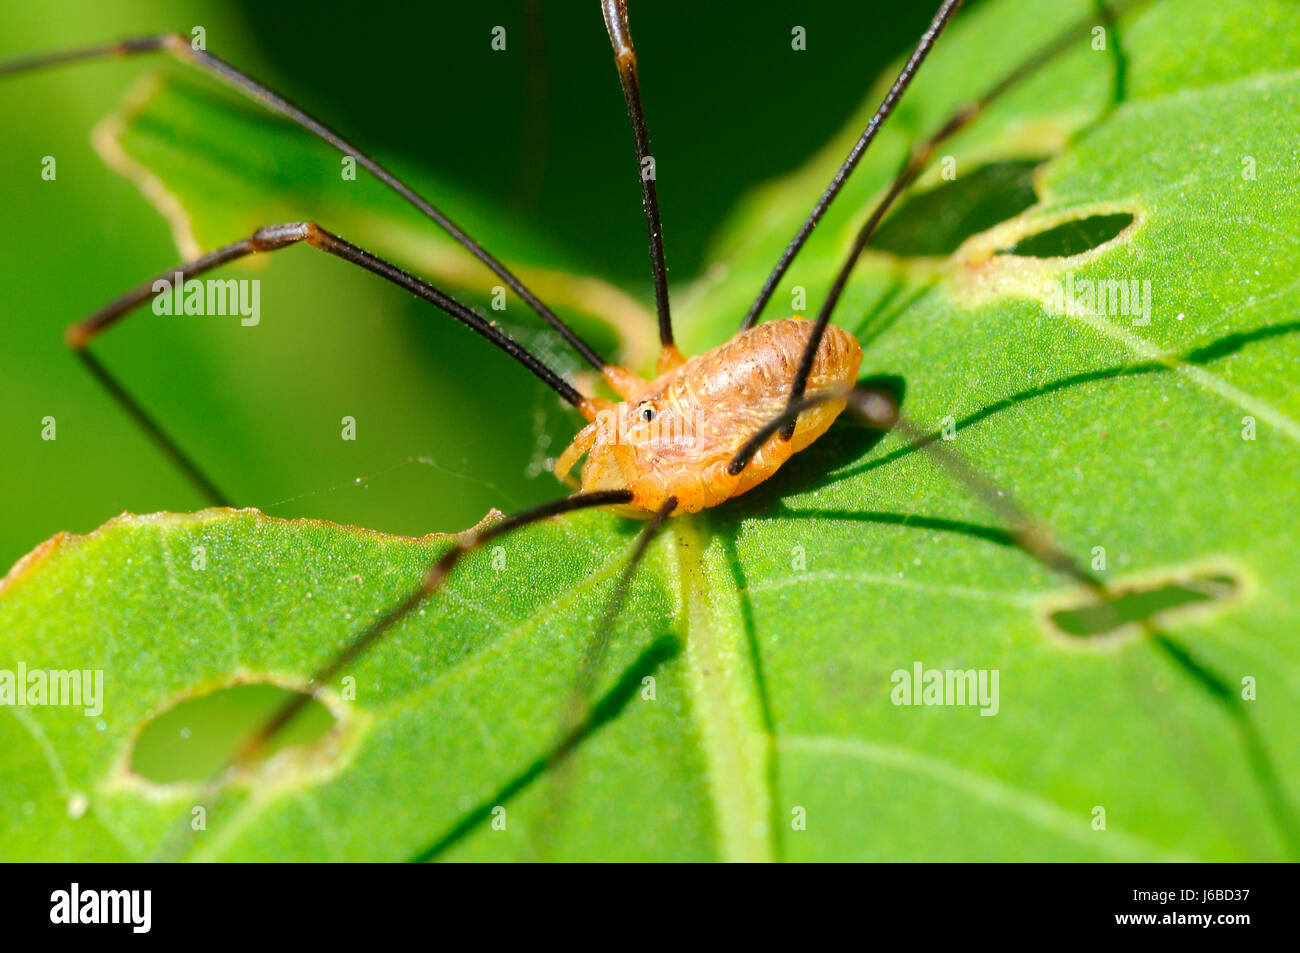 Grand - pholcus phalangioides pholcidae Banque D'Images